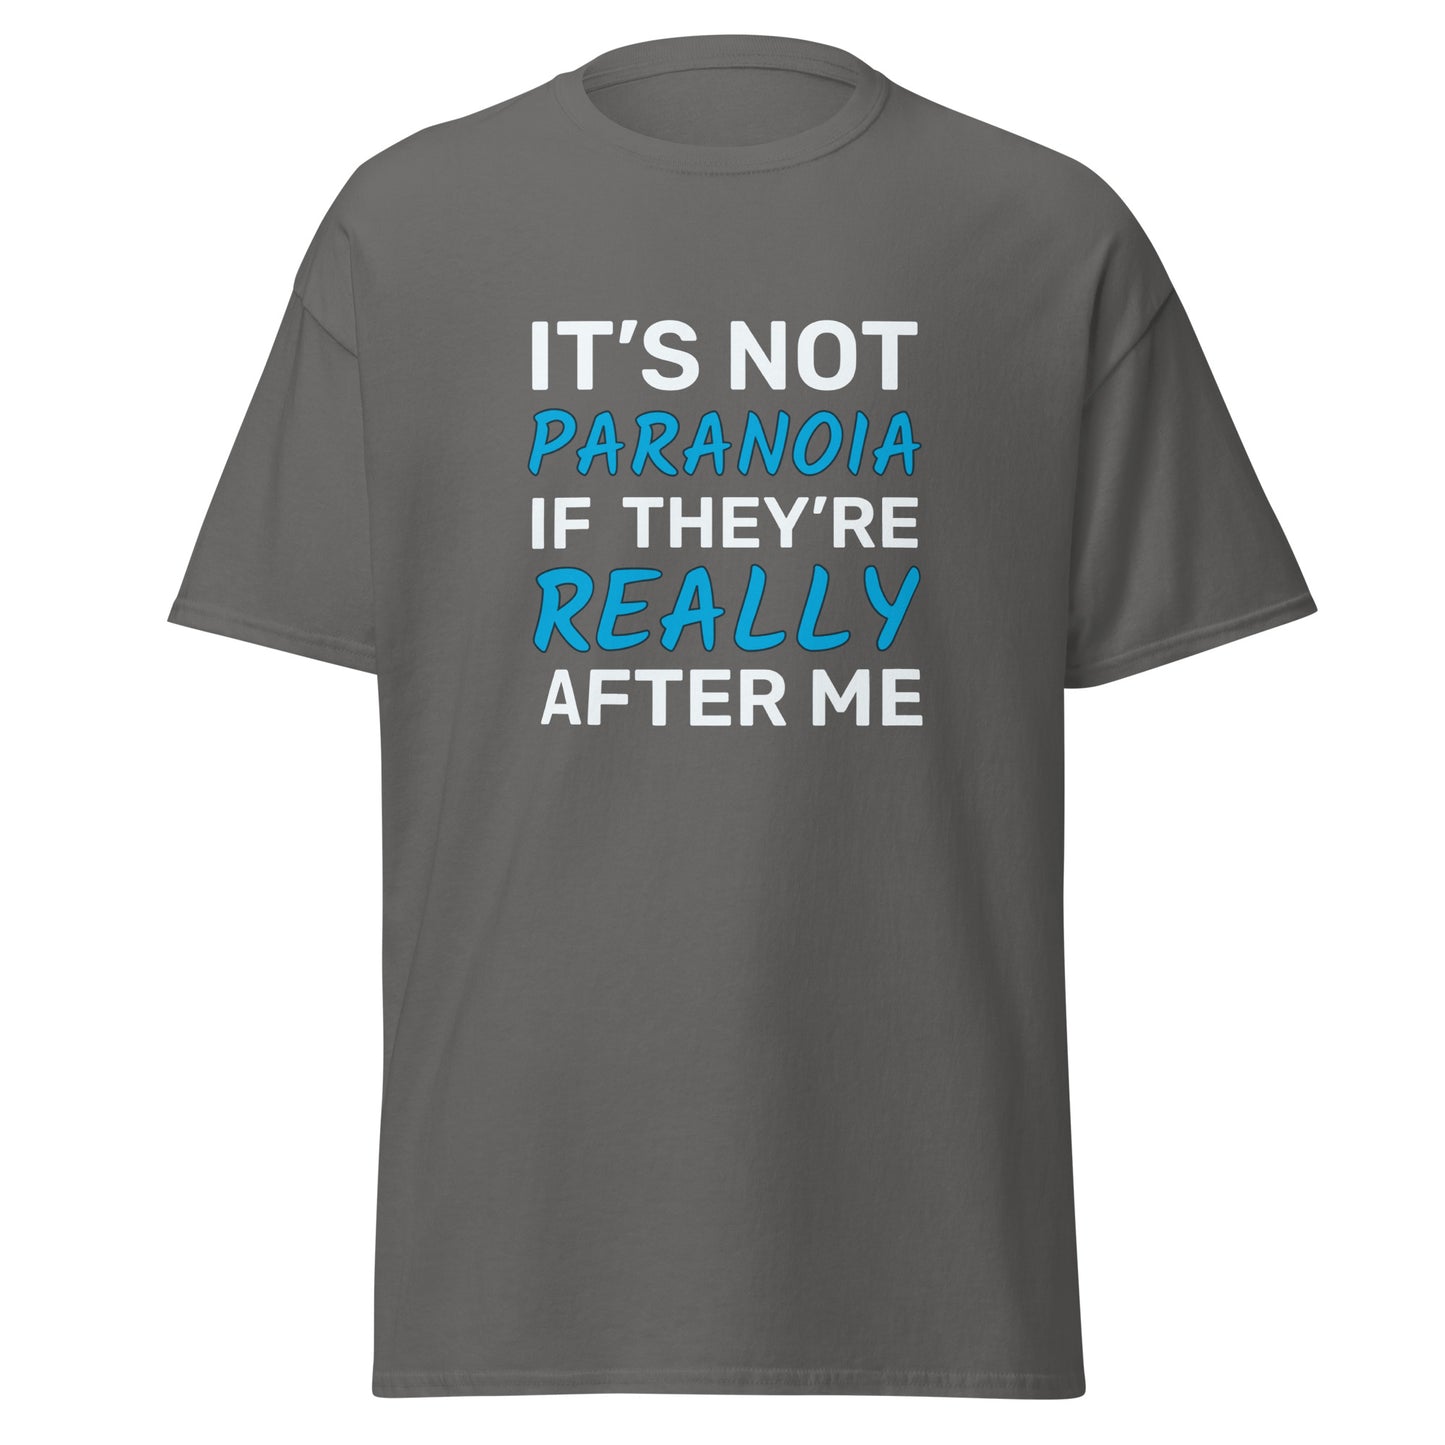 It's Not Paranoia If They're Really After Me - Men's Classic Tee